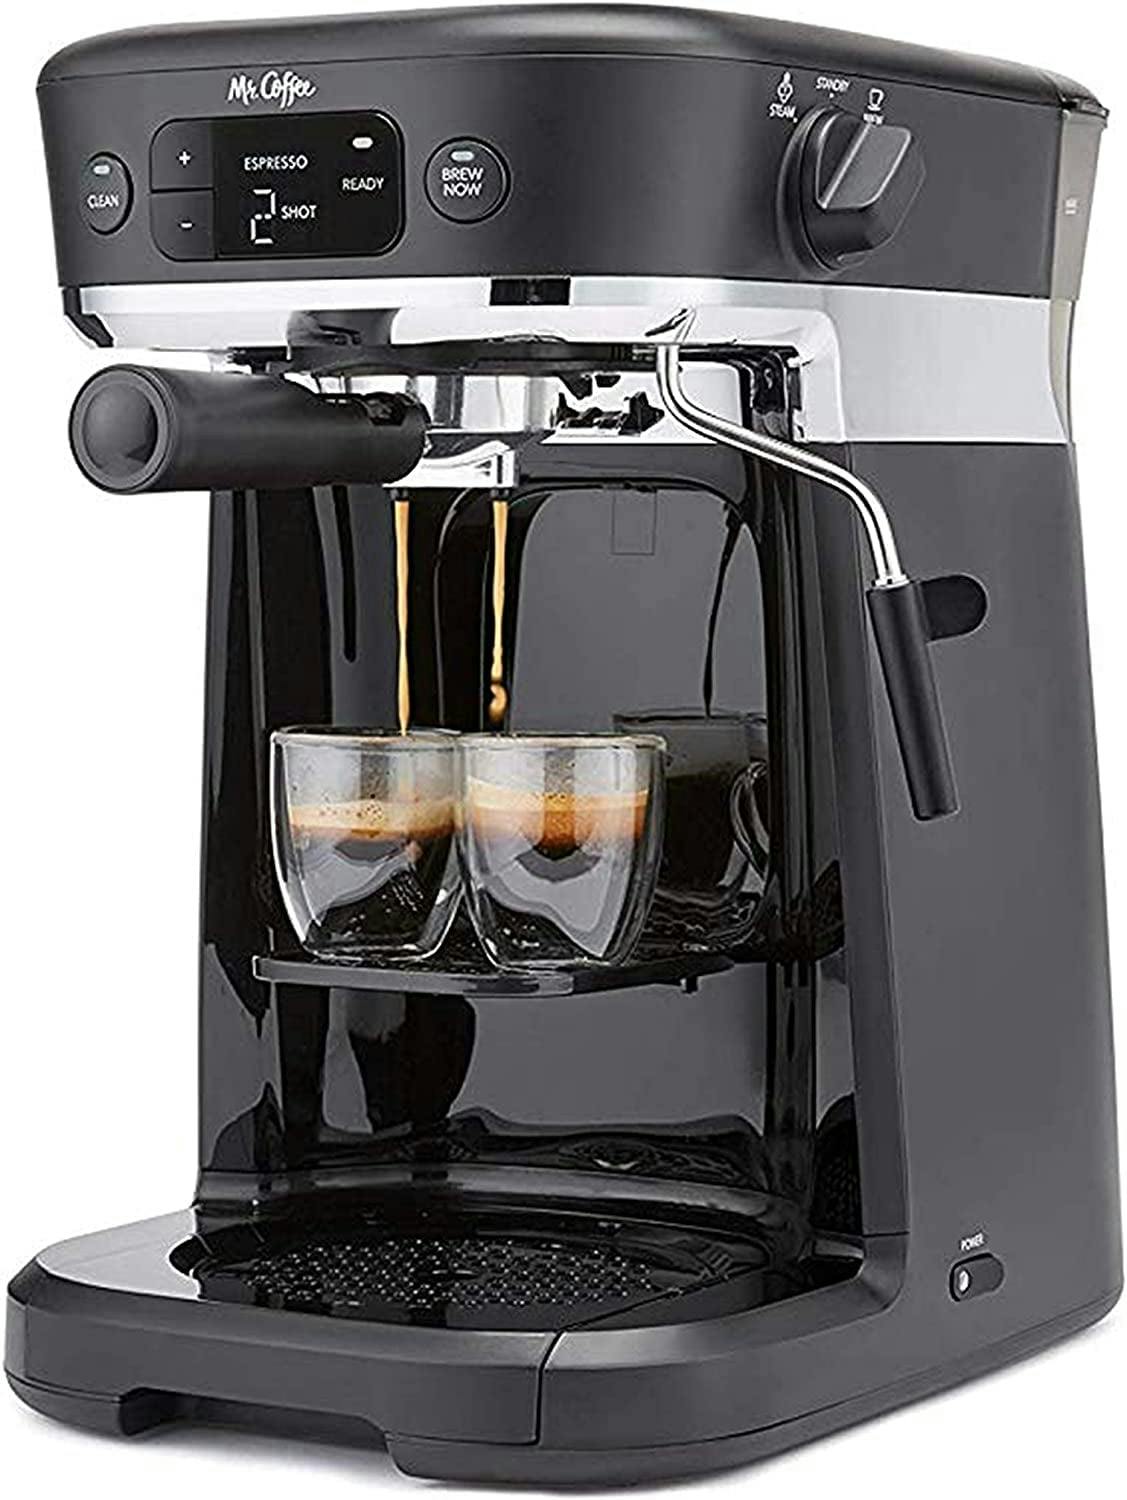 Compact All-in-One Espresso and Coffee Maker with Milk Frother, Black